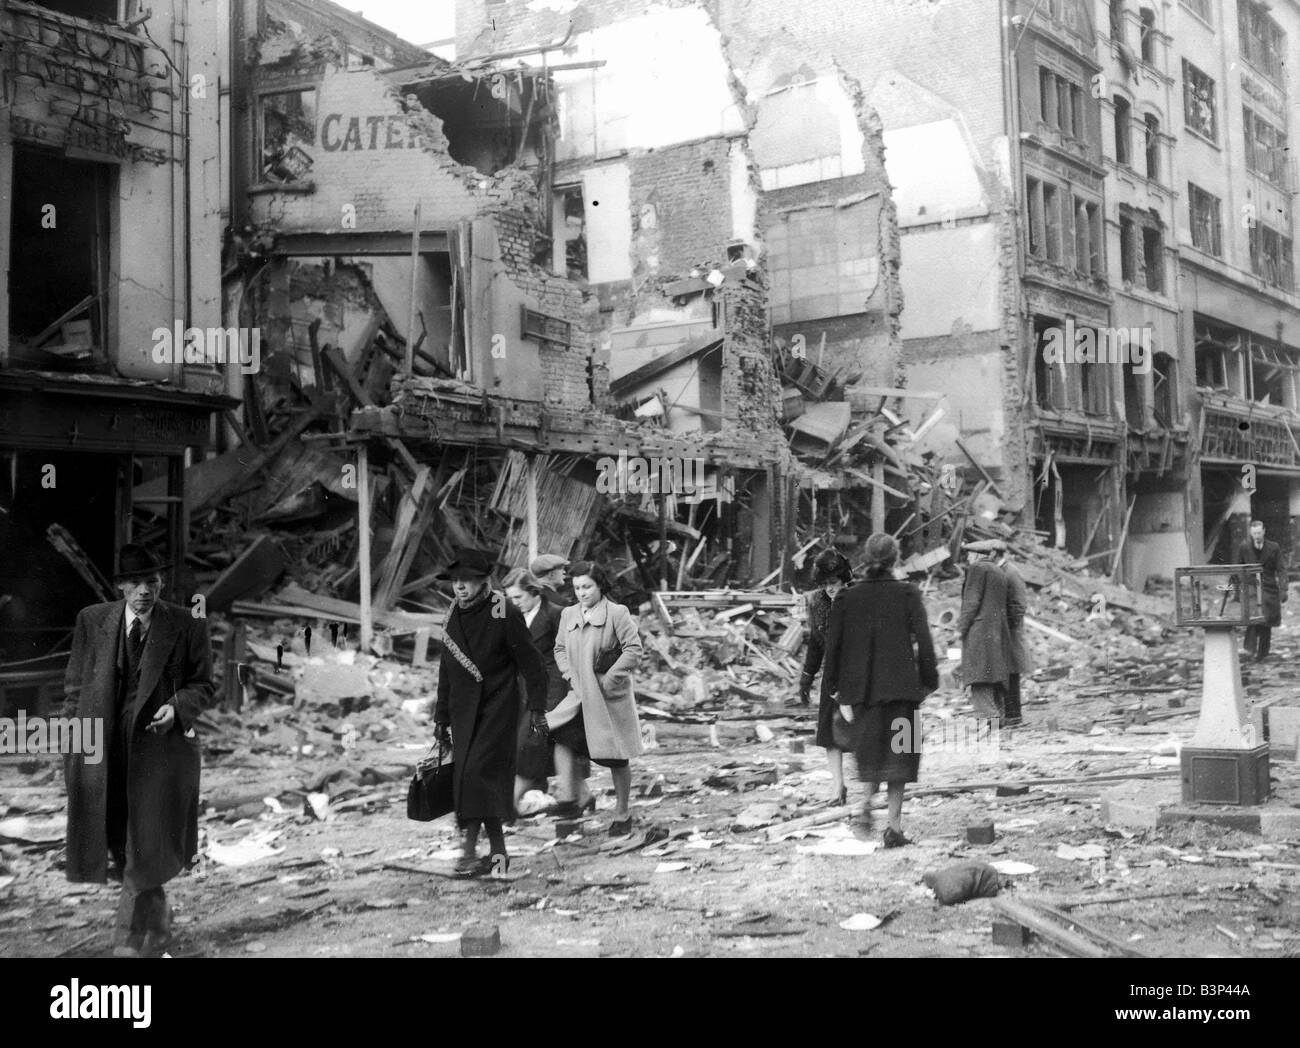 WW2 Air Raid Damage April 1941 Bomb damage in London People clear the streets walking around rubble and debris left by the air Stock Photo